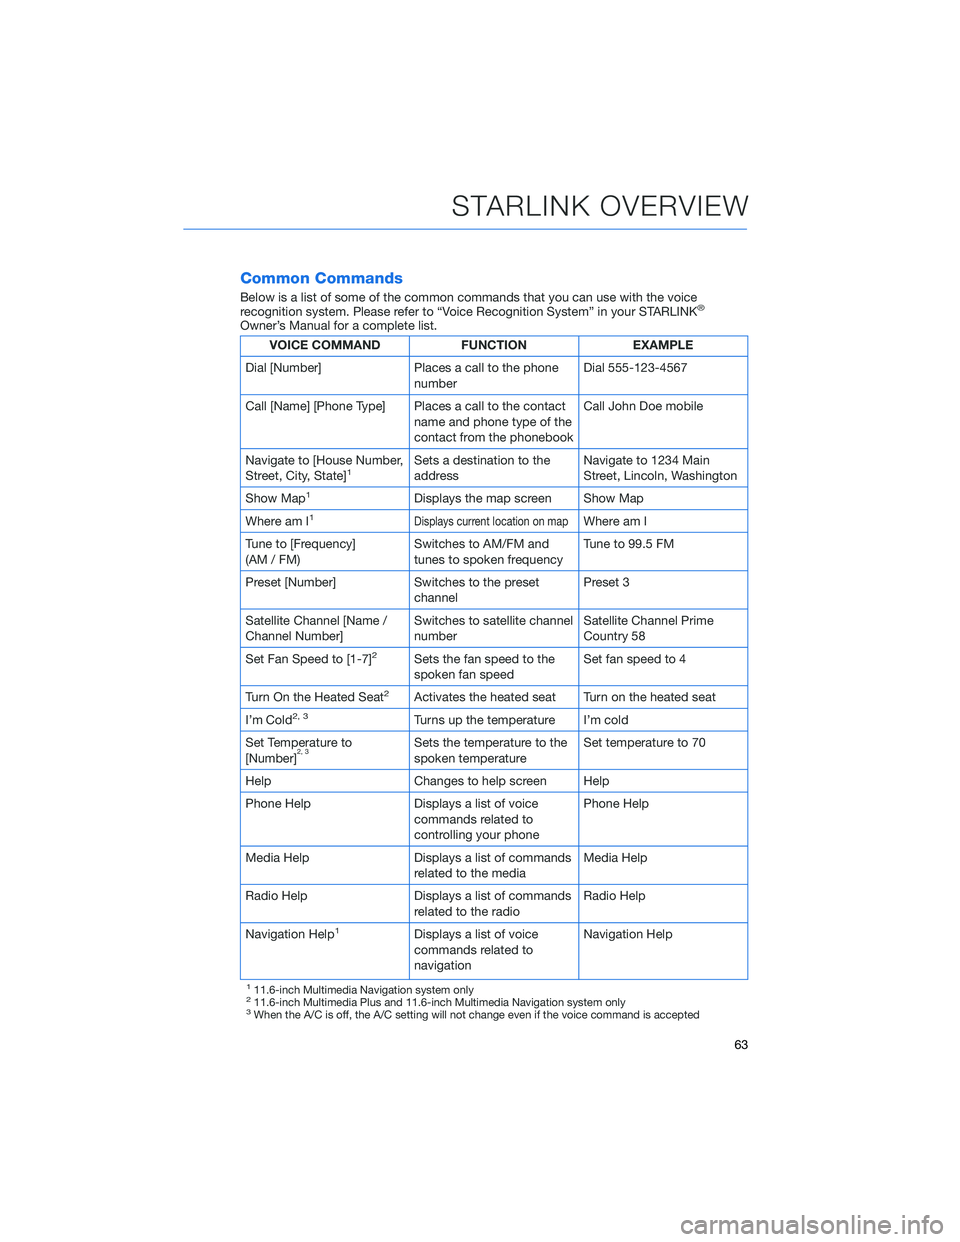 SUBARU LEGACY 2022  Getting Started Guide Common Commands
Below is a list of some of the common commands that you can use with the voice
recognition system. Please refer to “Voice Recognition System” in your STARLINK®
Owner’s Manual fo